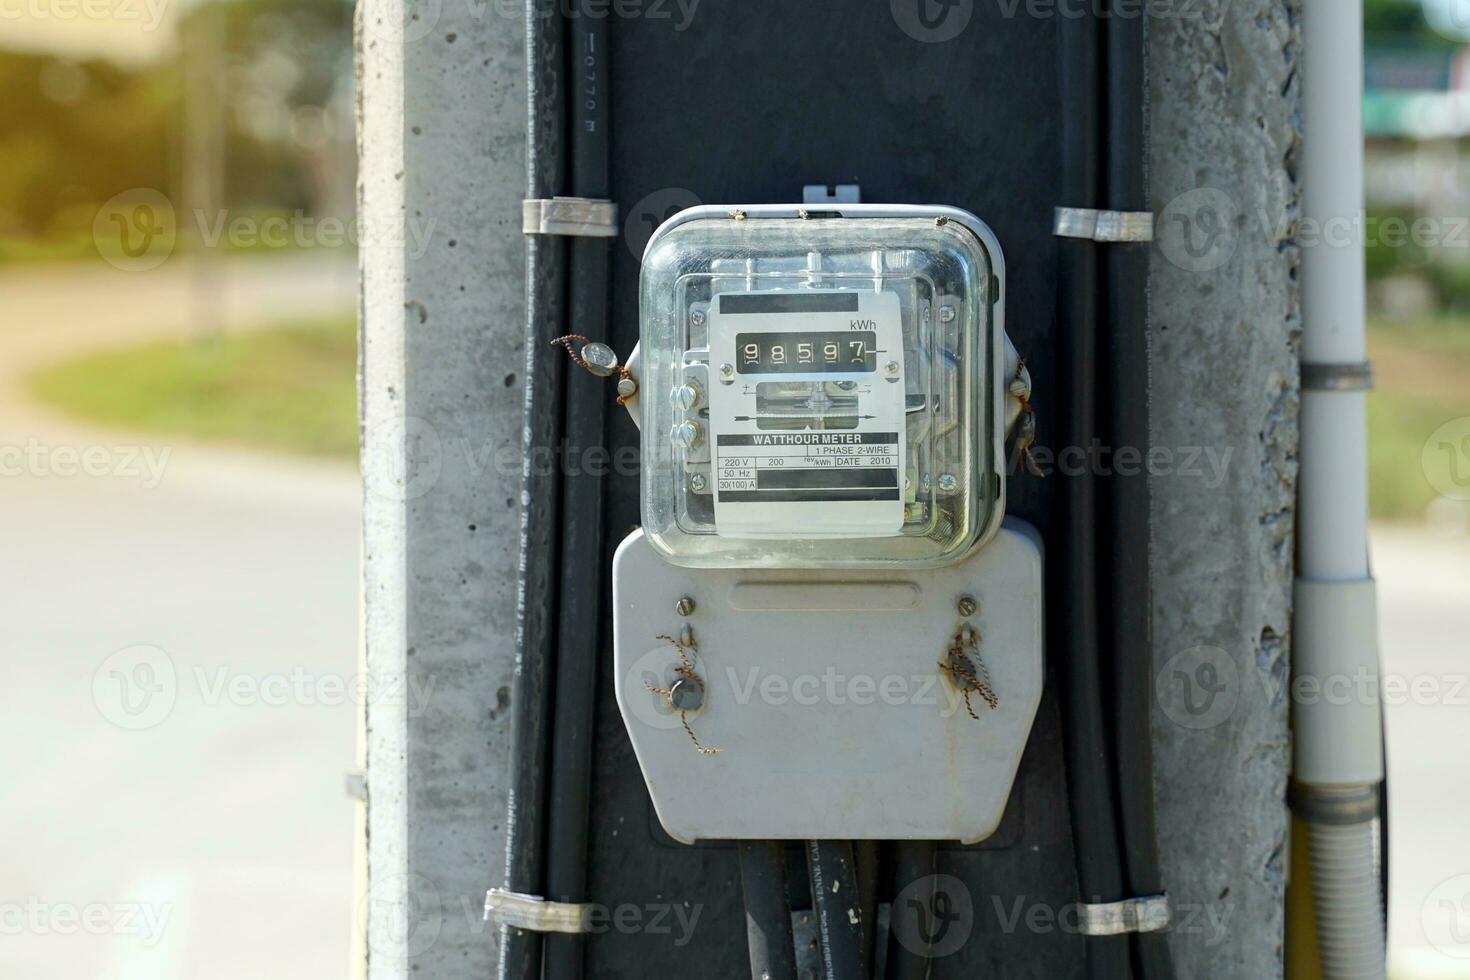 An electric meter is a device used to measure and display electrical quantities such as current, voltage, resistance, and power. There are many sizes suitable for use. photo